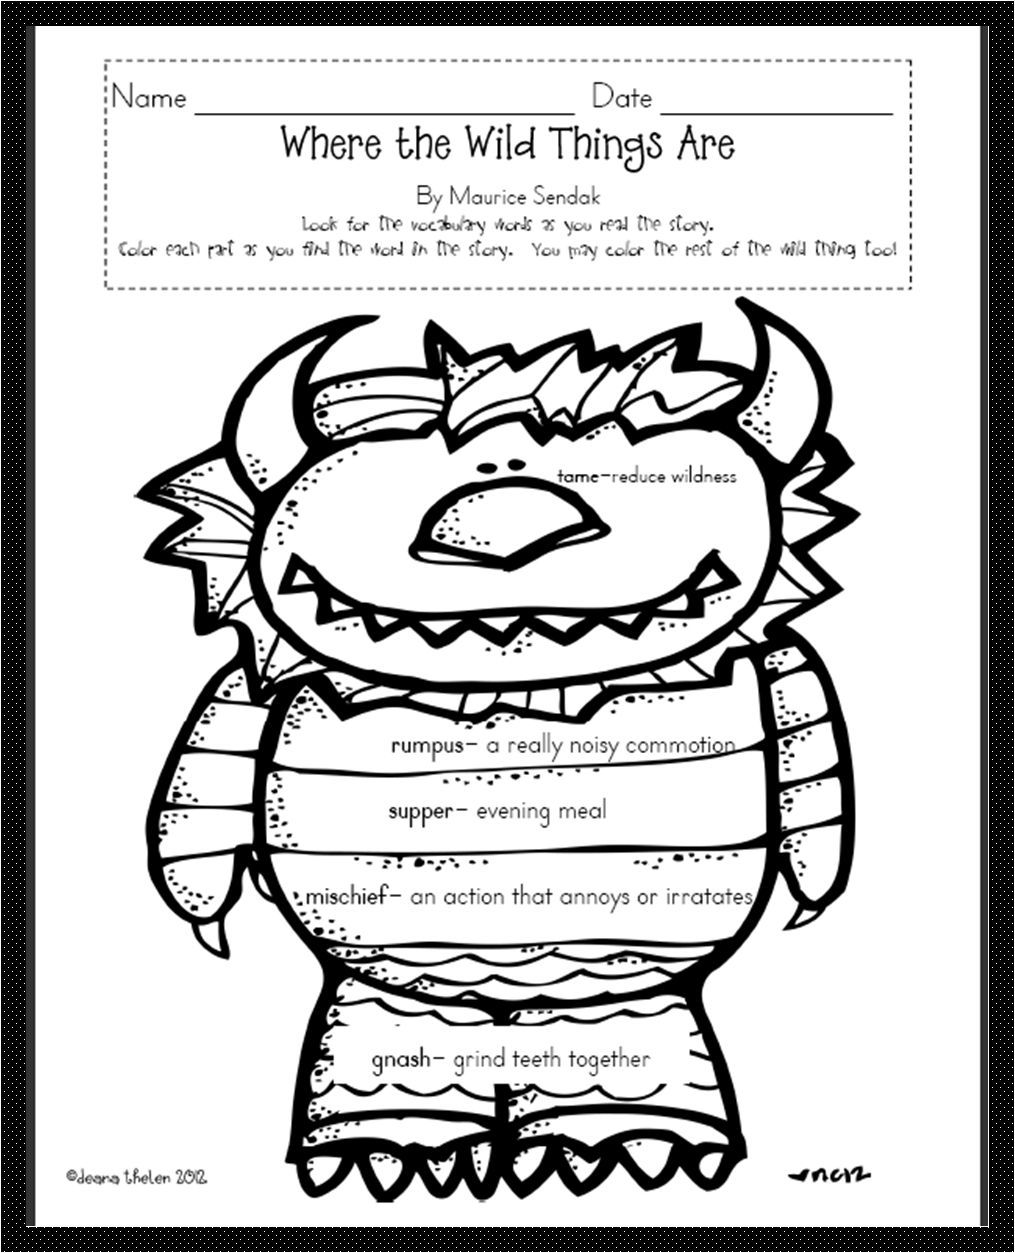 Where the wild things are activity sheet